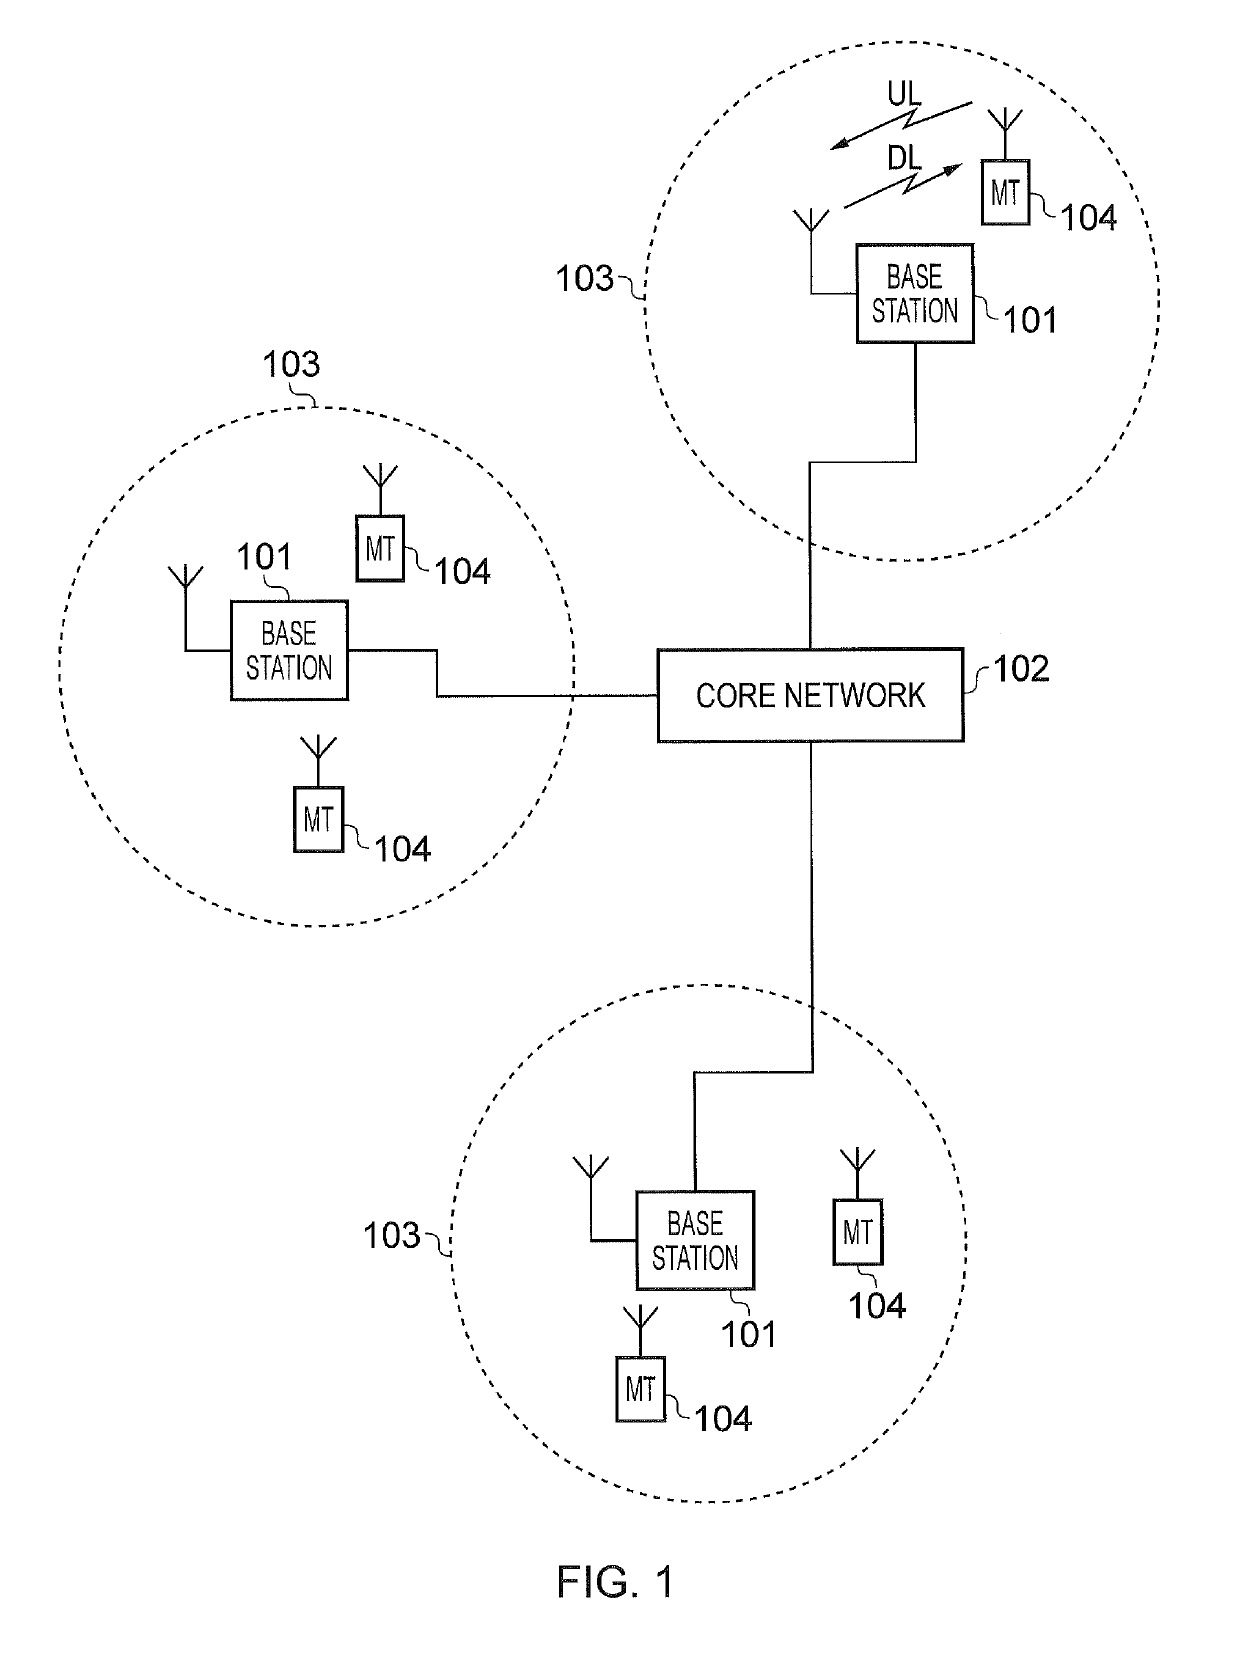 Communications device, communications apparatus operating as a relay node, infrastructure equipment and methods